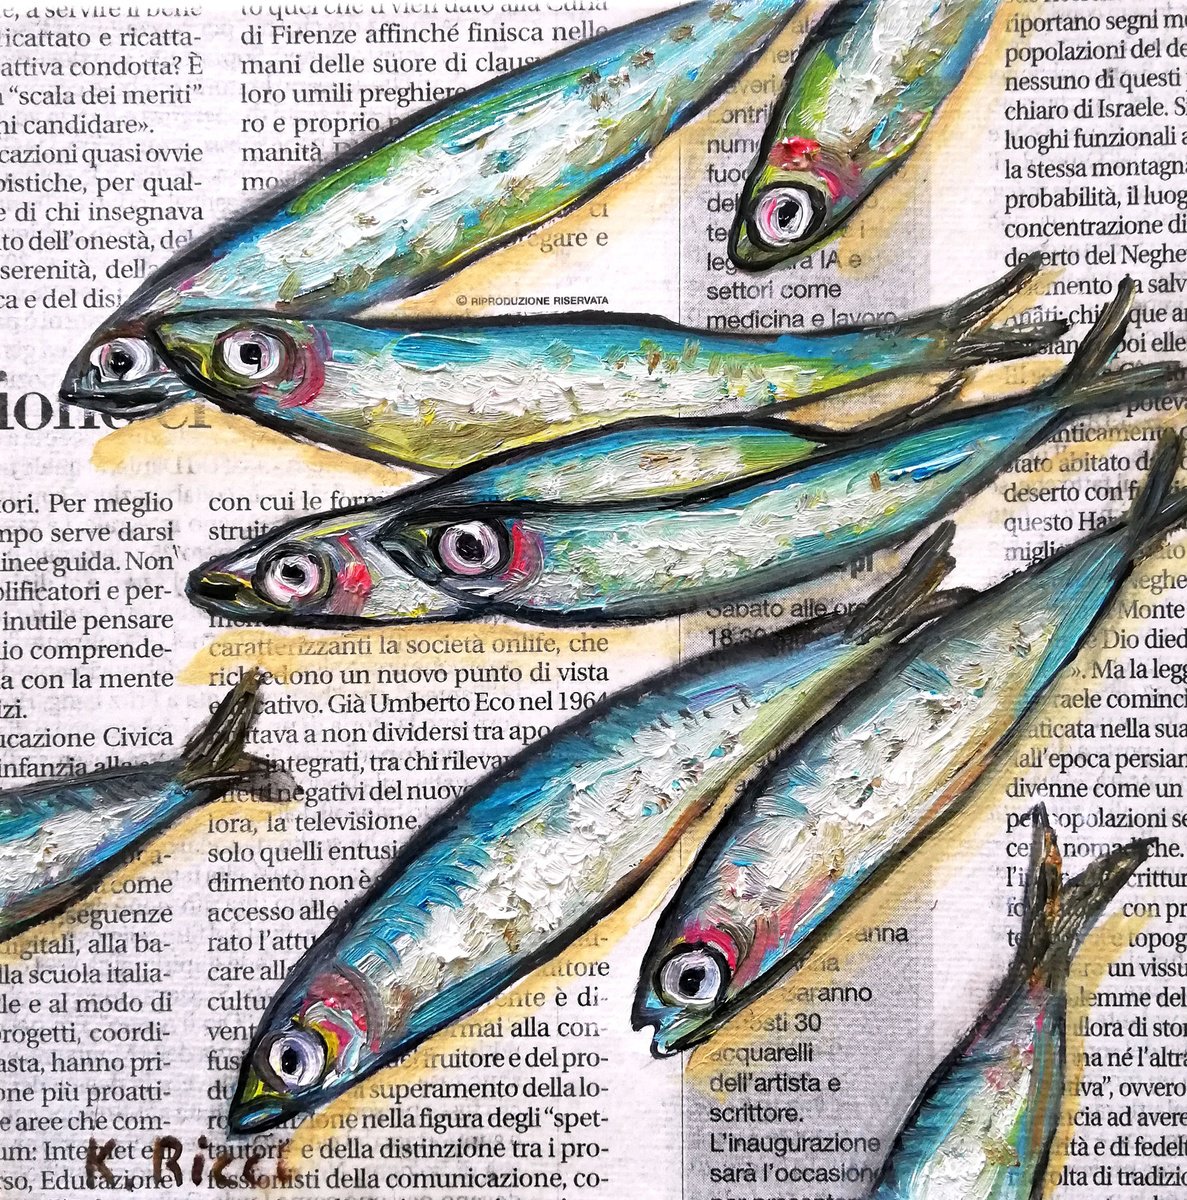 Fishes on Newspaper Original Oil on Canvas Board Painting 6 by 6 inches (15x15 cm) by Katia Ricci